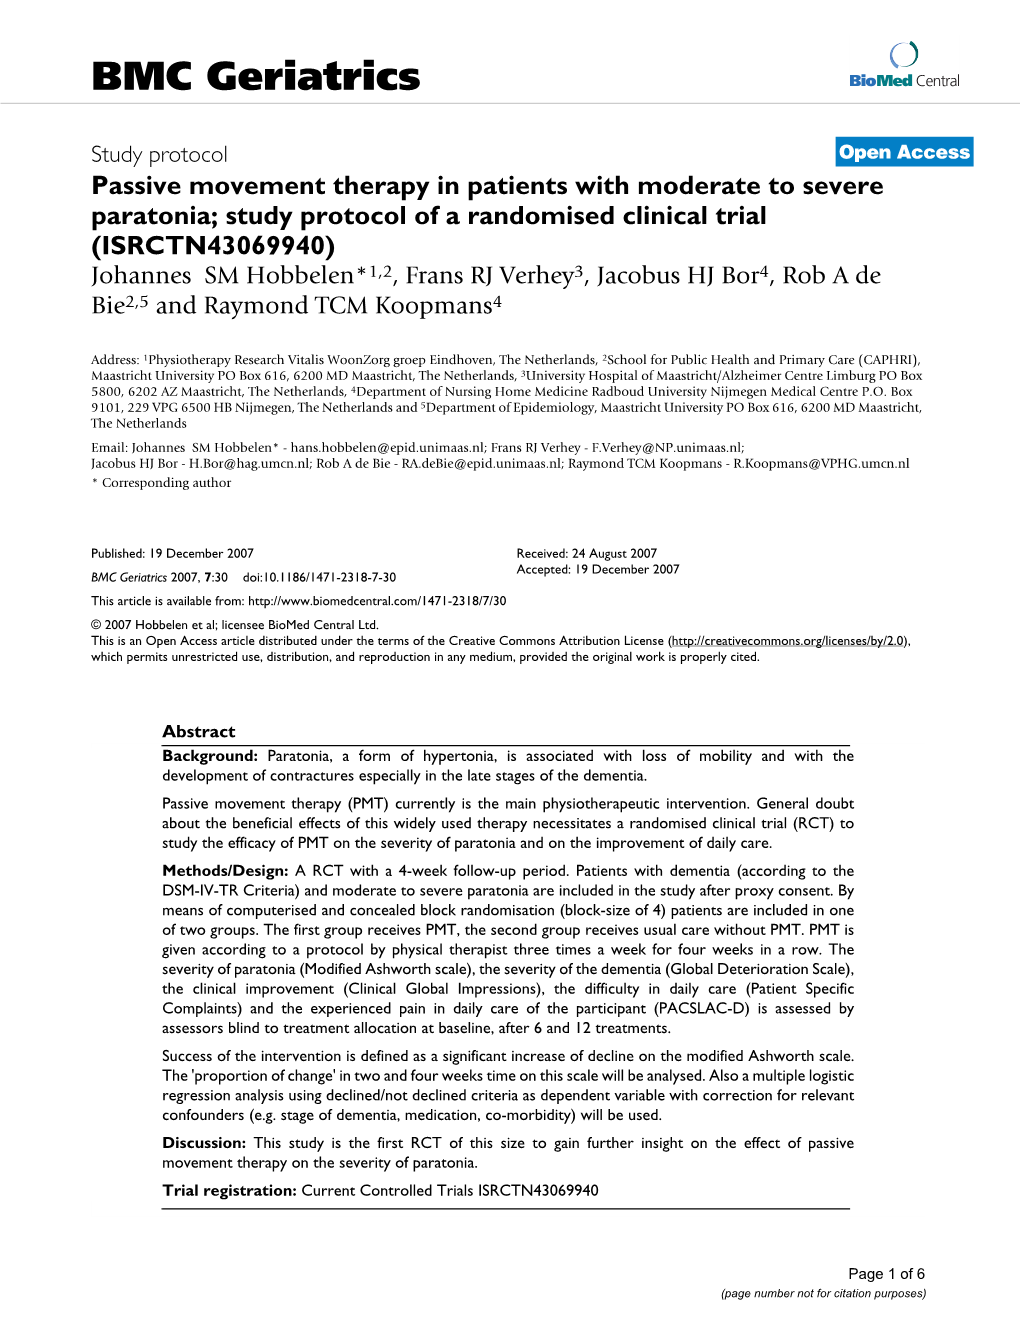 Passive Movement Therapy in Patients with Moderate to Severe Paratonia